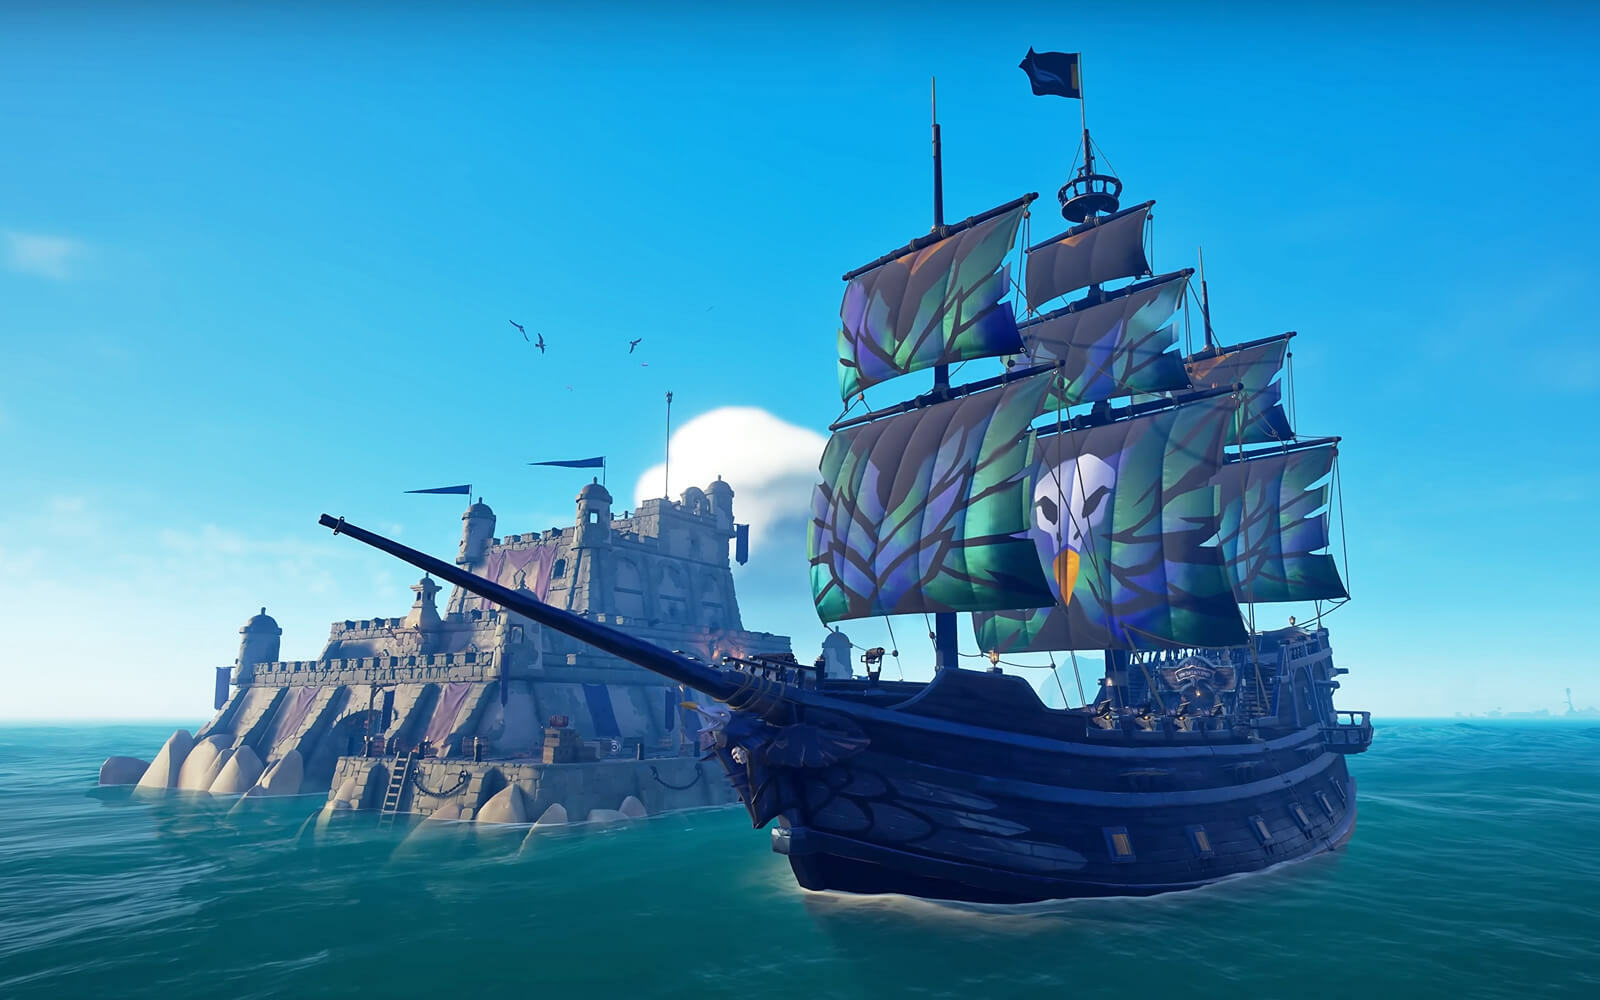 Skull and Bones Gameplay Trailer Showcases Customization, Fortunes and More